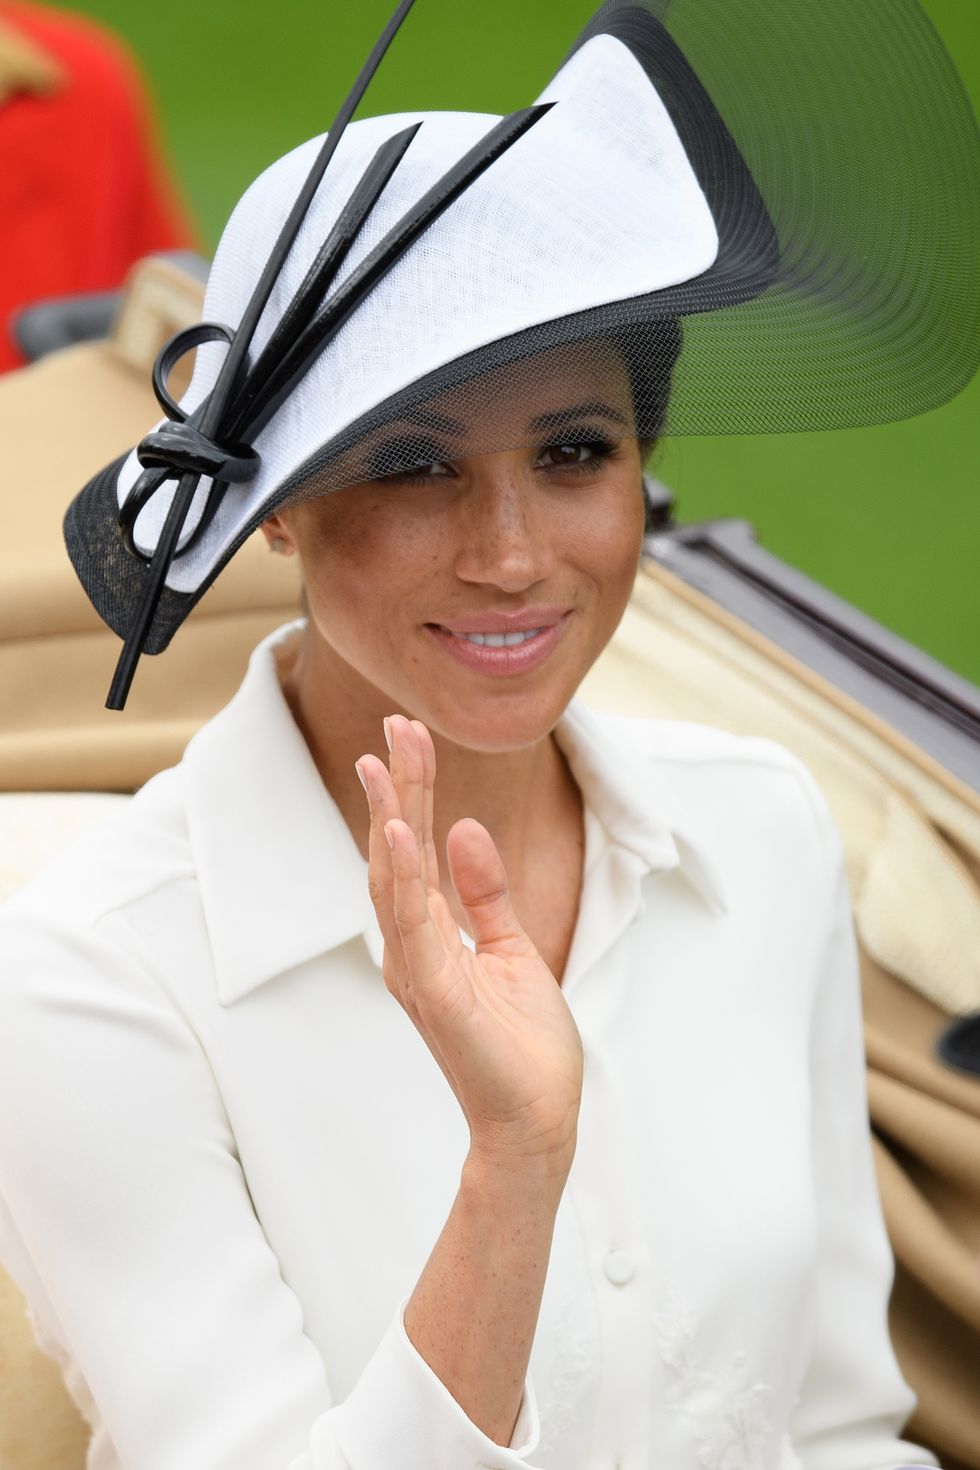 https://hips.hearstapps.com/hmg-prod.s3.amazonaws.com/images/hbz-royal-ascot-hats-meghan-markle-gettyimages-978670118-1529432849.jpg?crop=1xw:1xh;center,top&resize=980:*